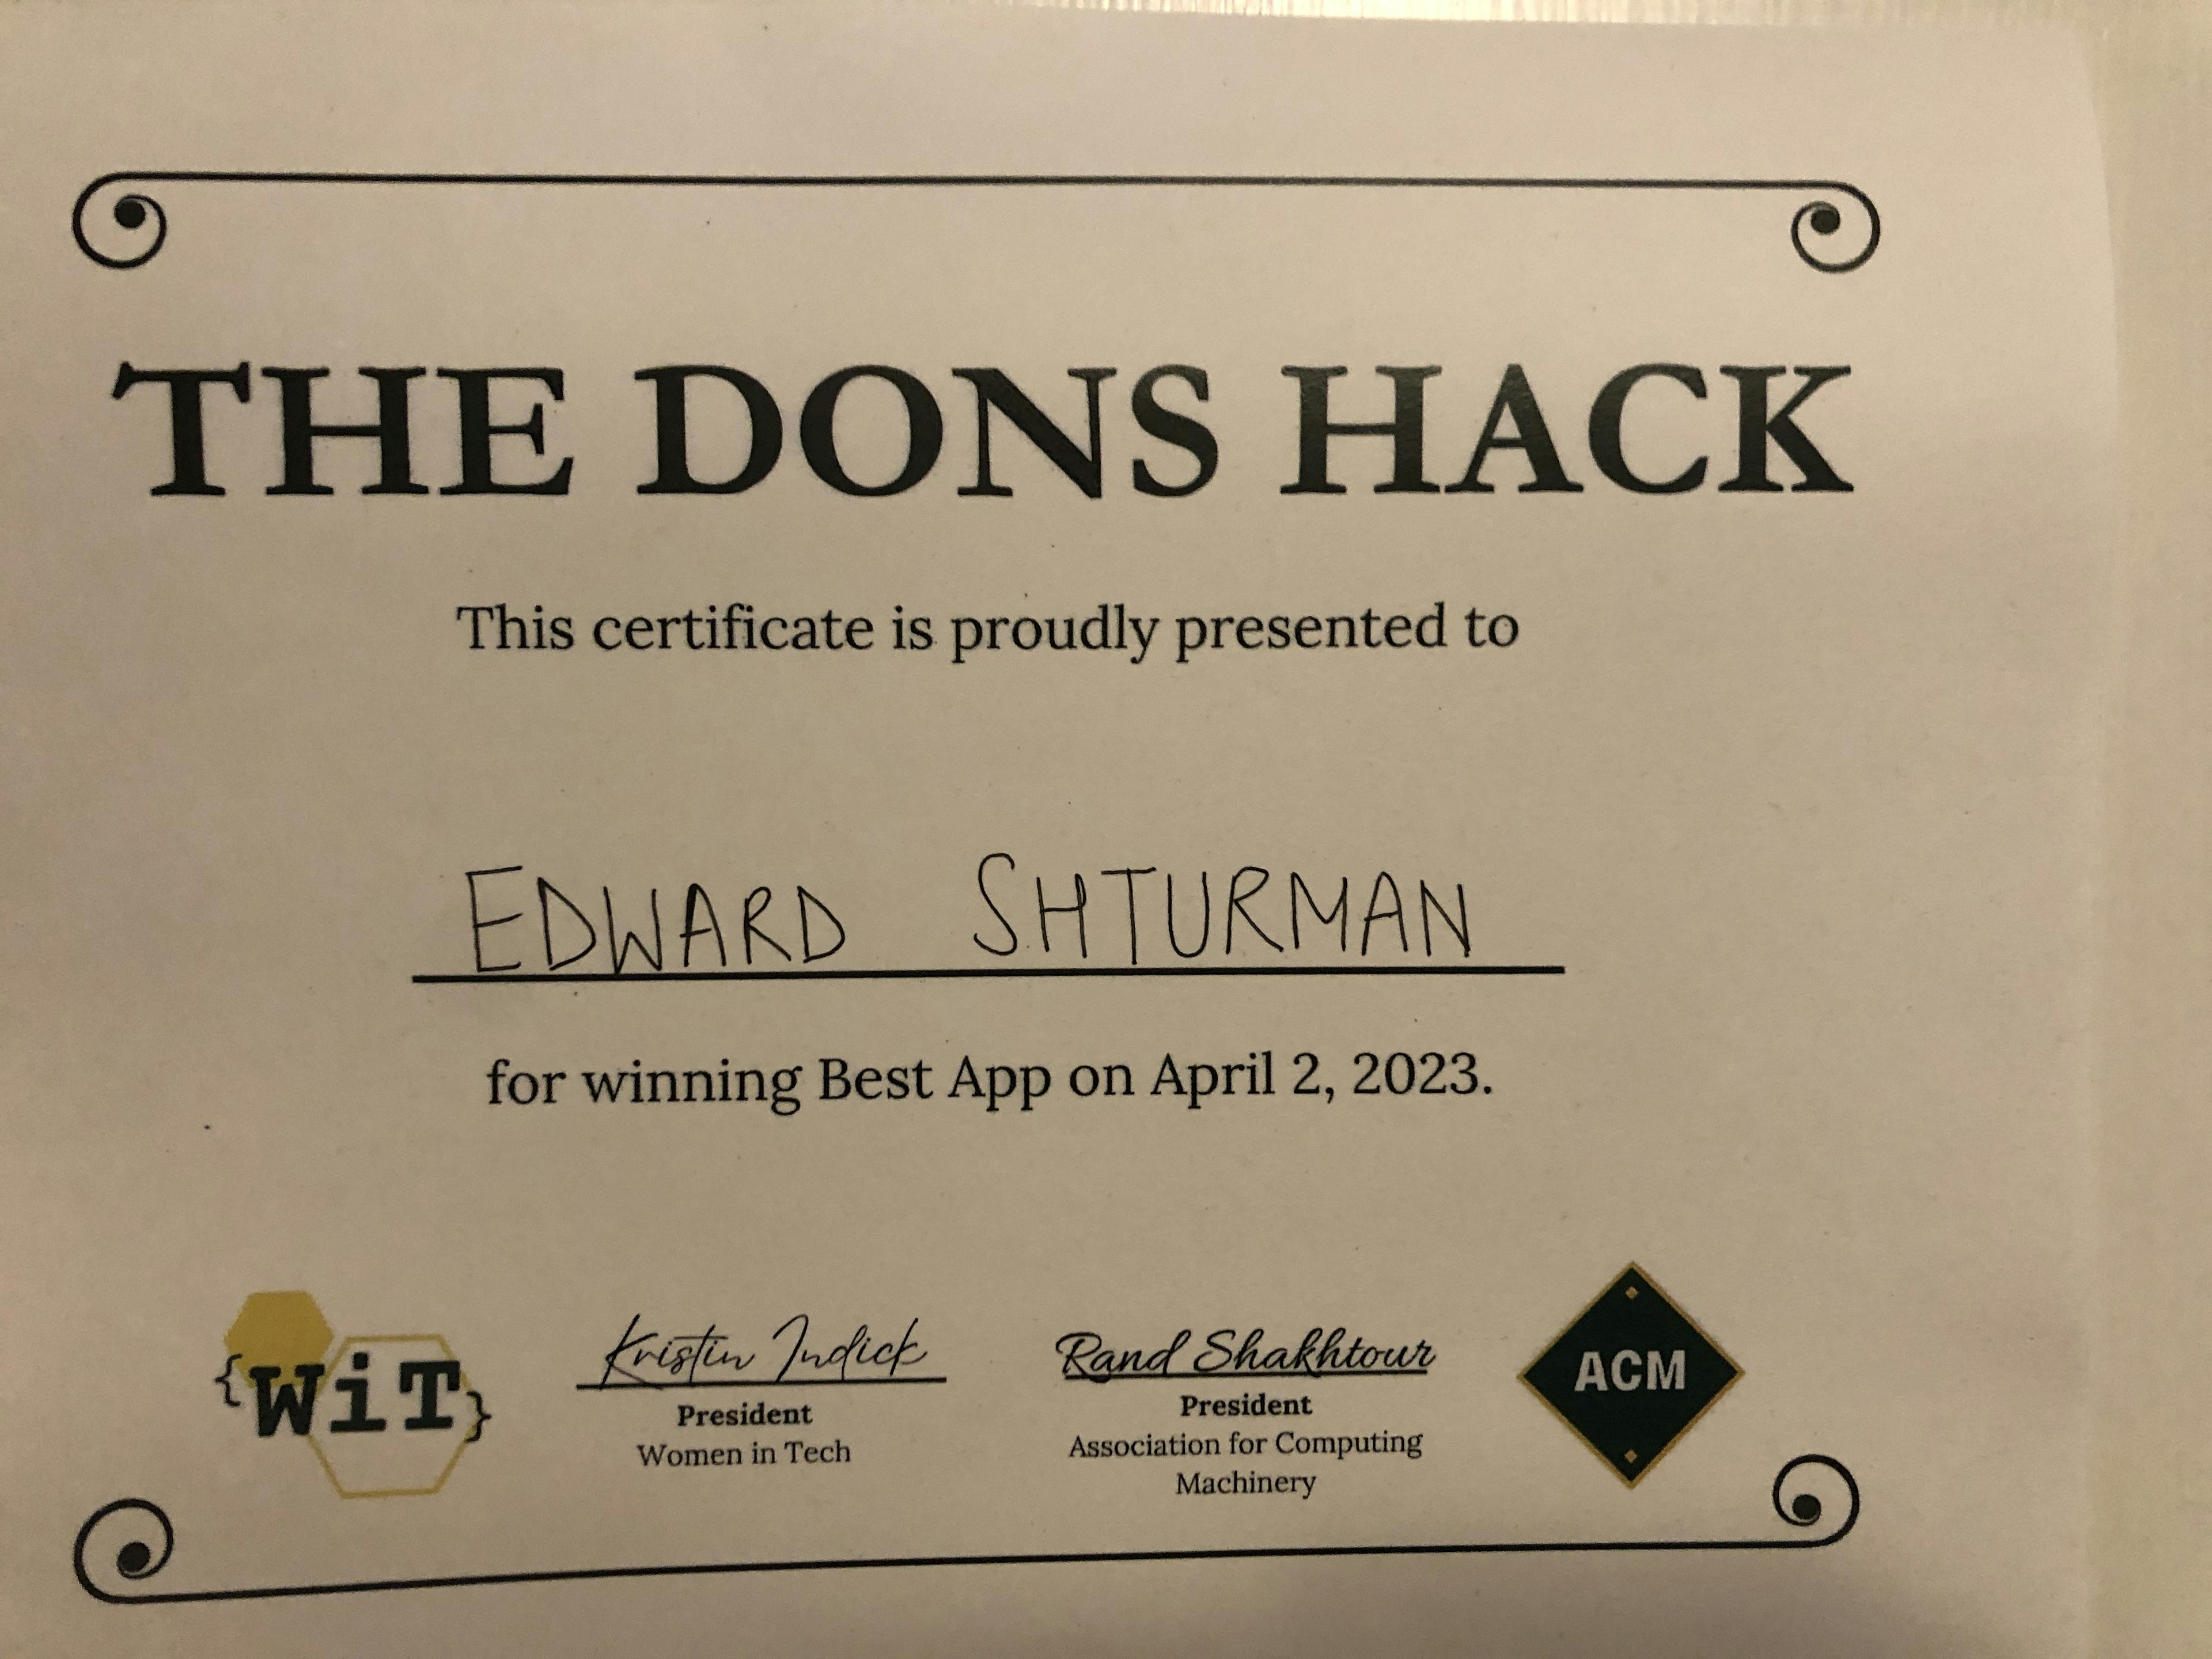 A certificate congratulating me for winning Best App at Dons Hack 2023.